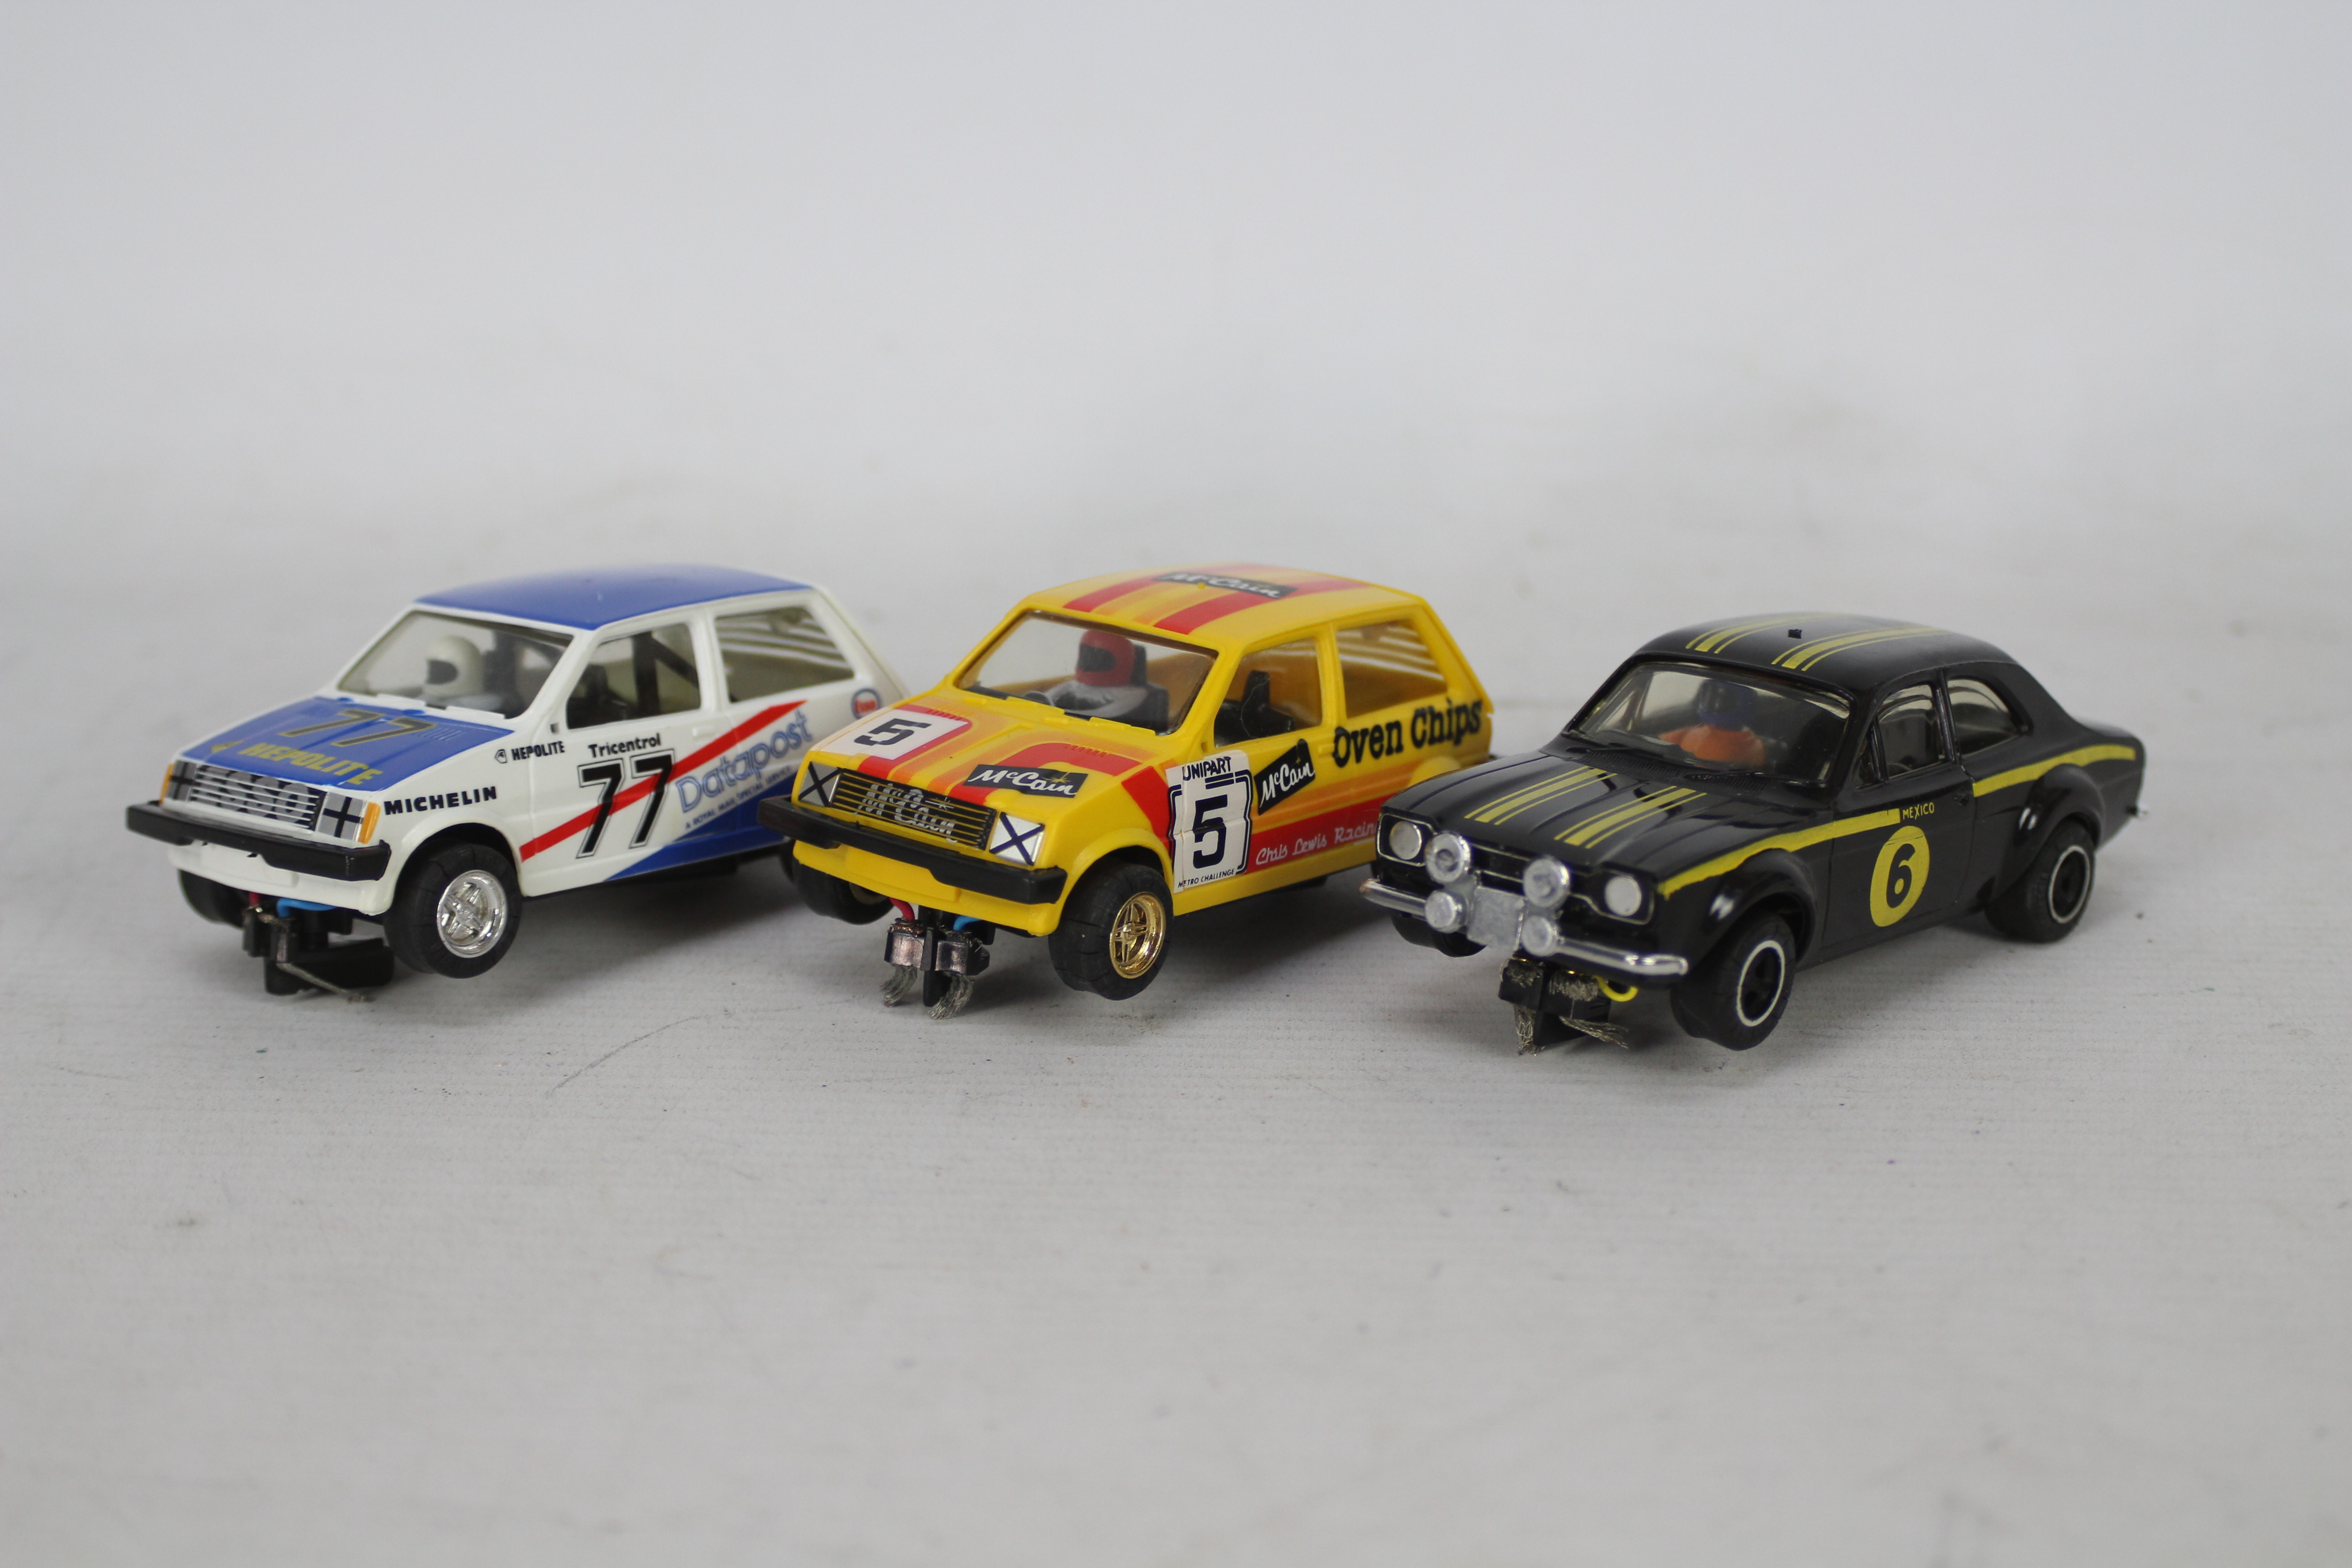 Scalextric - Three unboxed Scalextric rally themed slot cars.